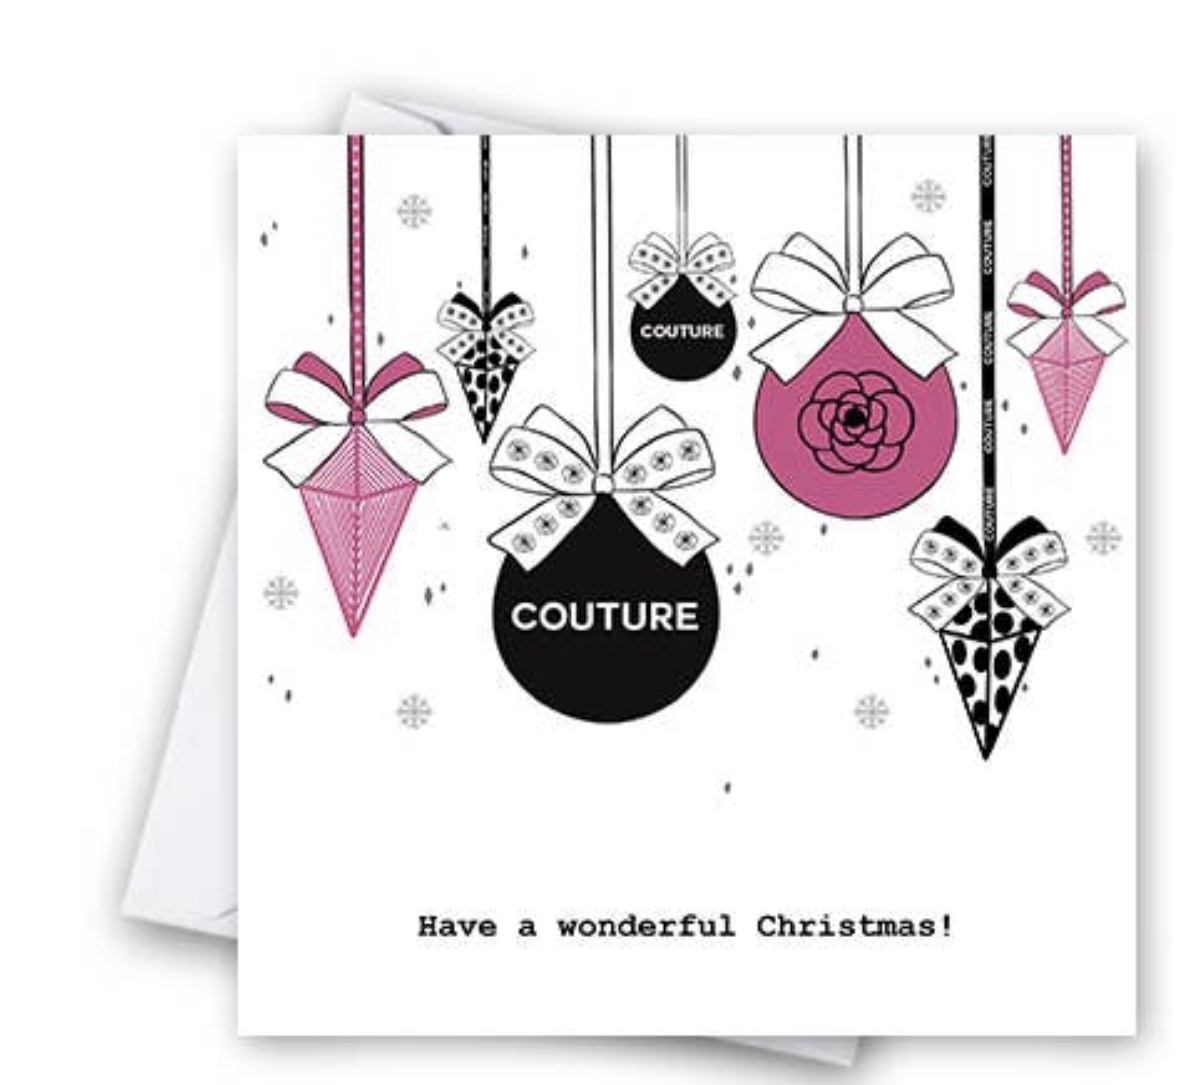 Catherine Loves Christmas Greeting Card Couture Baubles Louis Vuitton